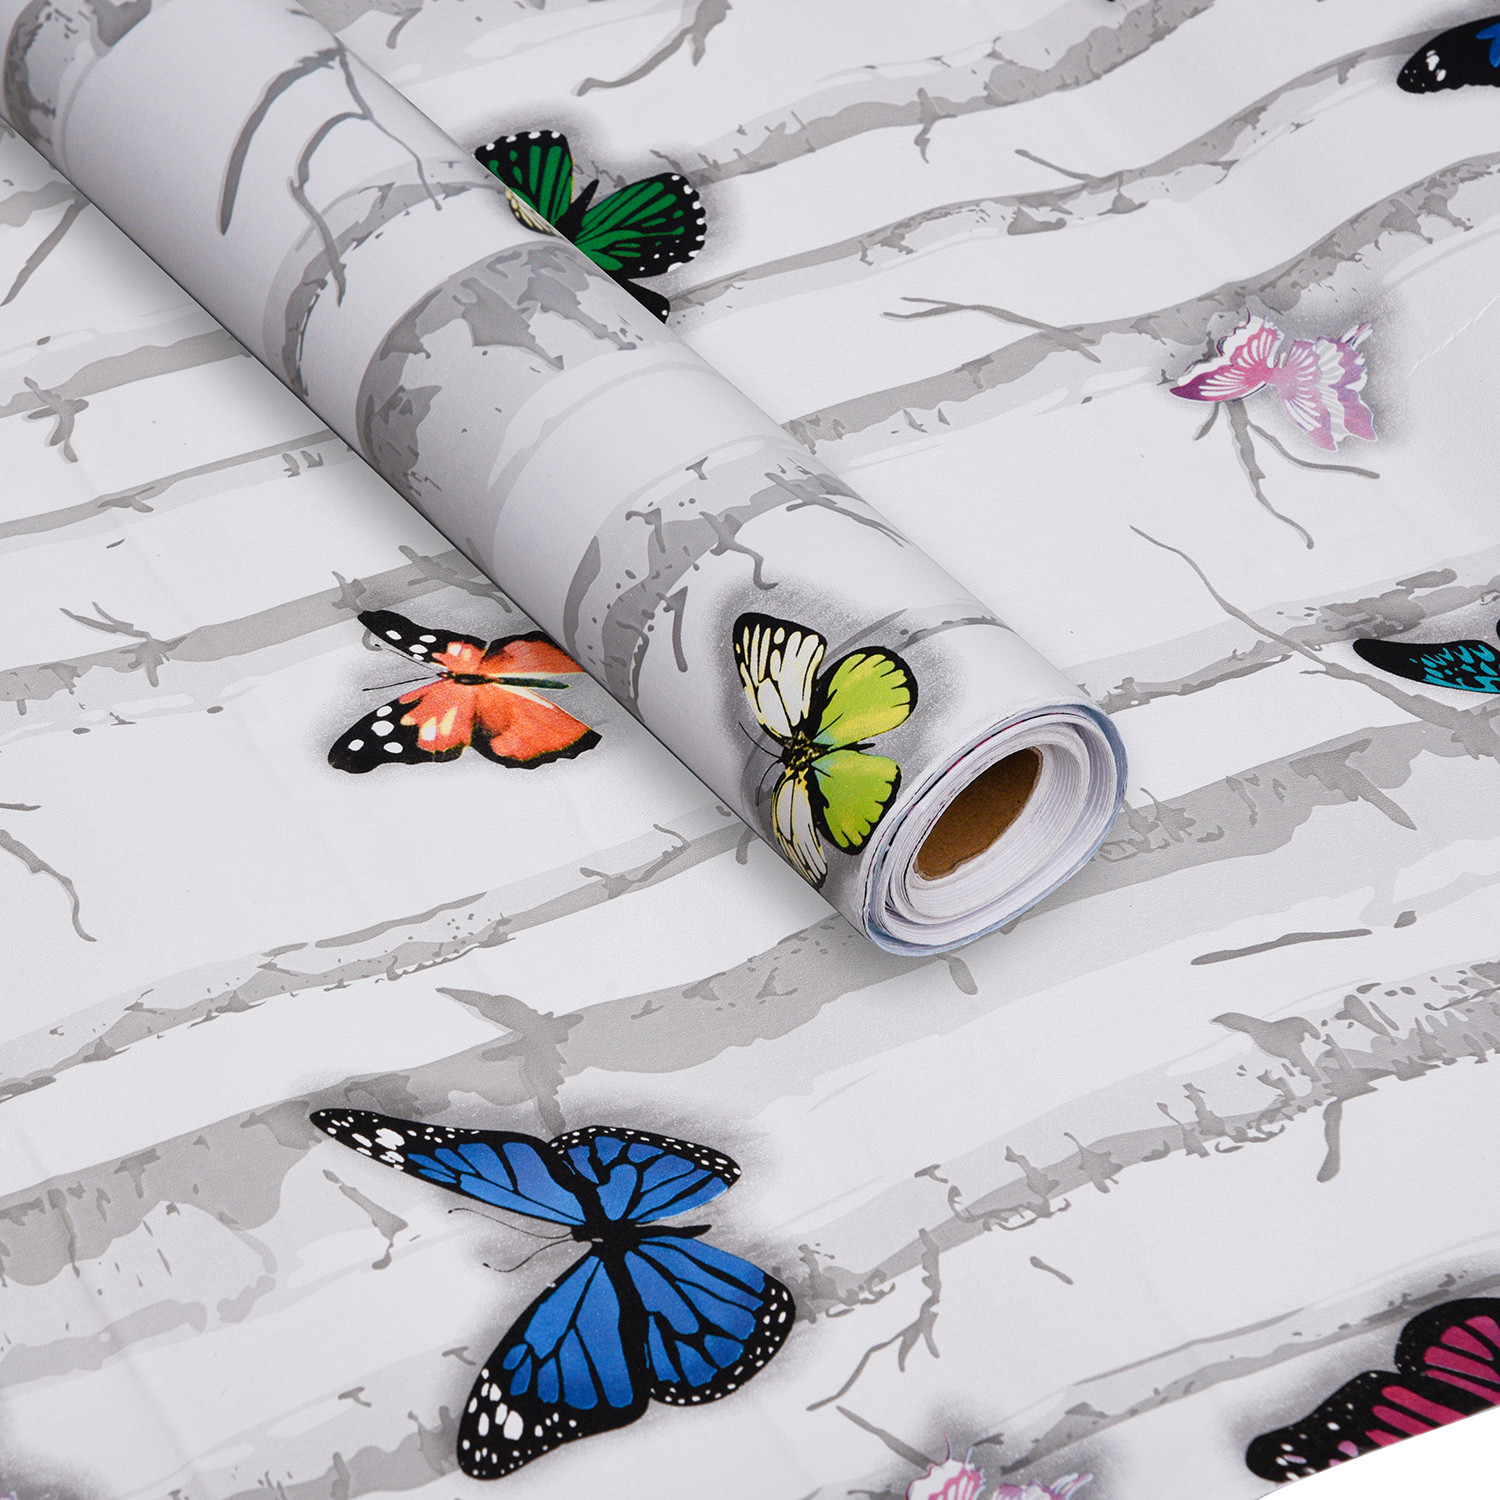 Kuber Industries Self Adhesive Wallpaper Sheet|Vinyl PVC Butterfly Print Wall Stickers Peel and Stick for Furniture, Almirah, Table Top, Wardrobe, Kitchen Cupboard,Bedroom-10 Meter,(White)